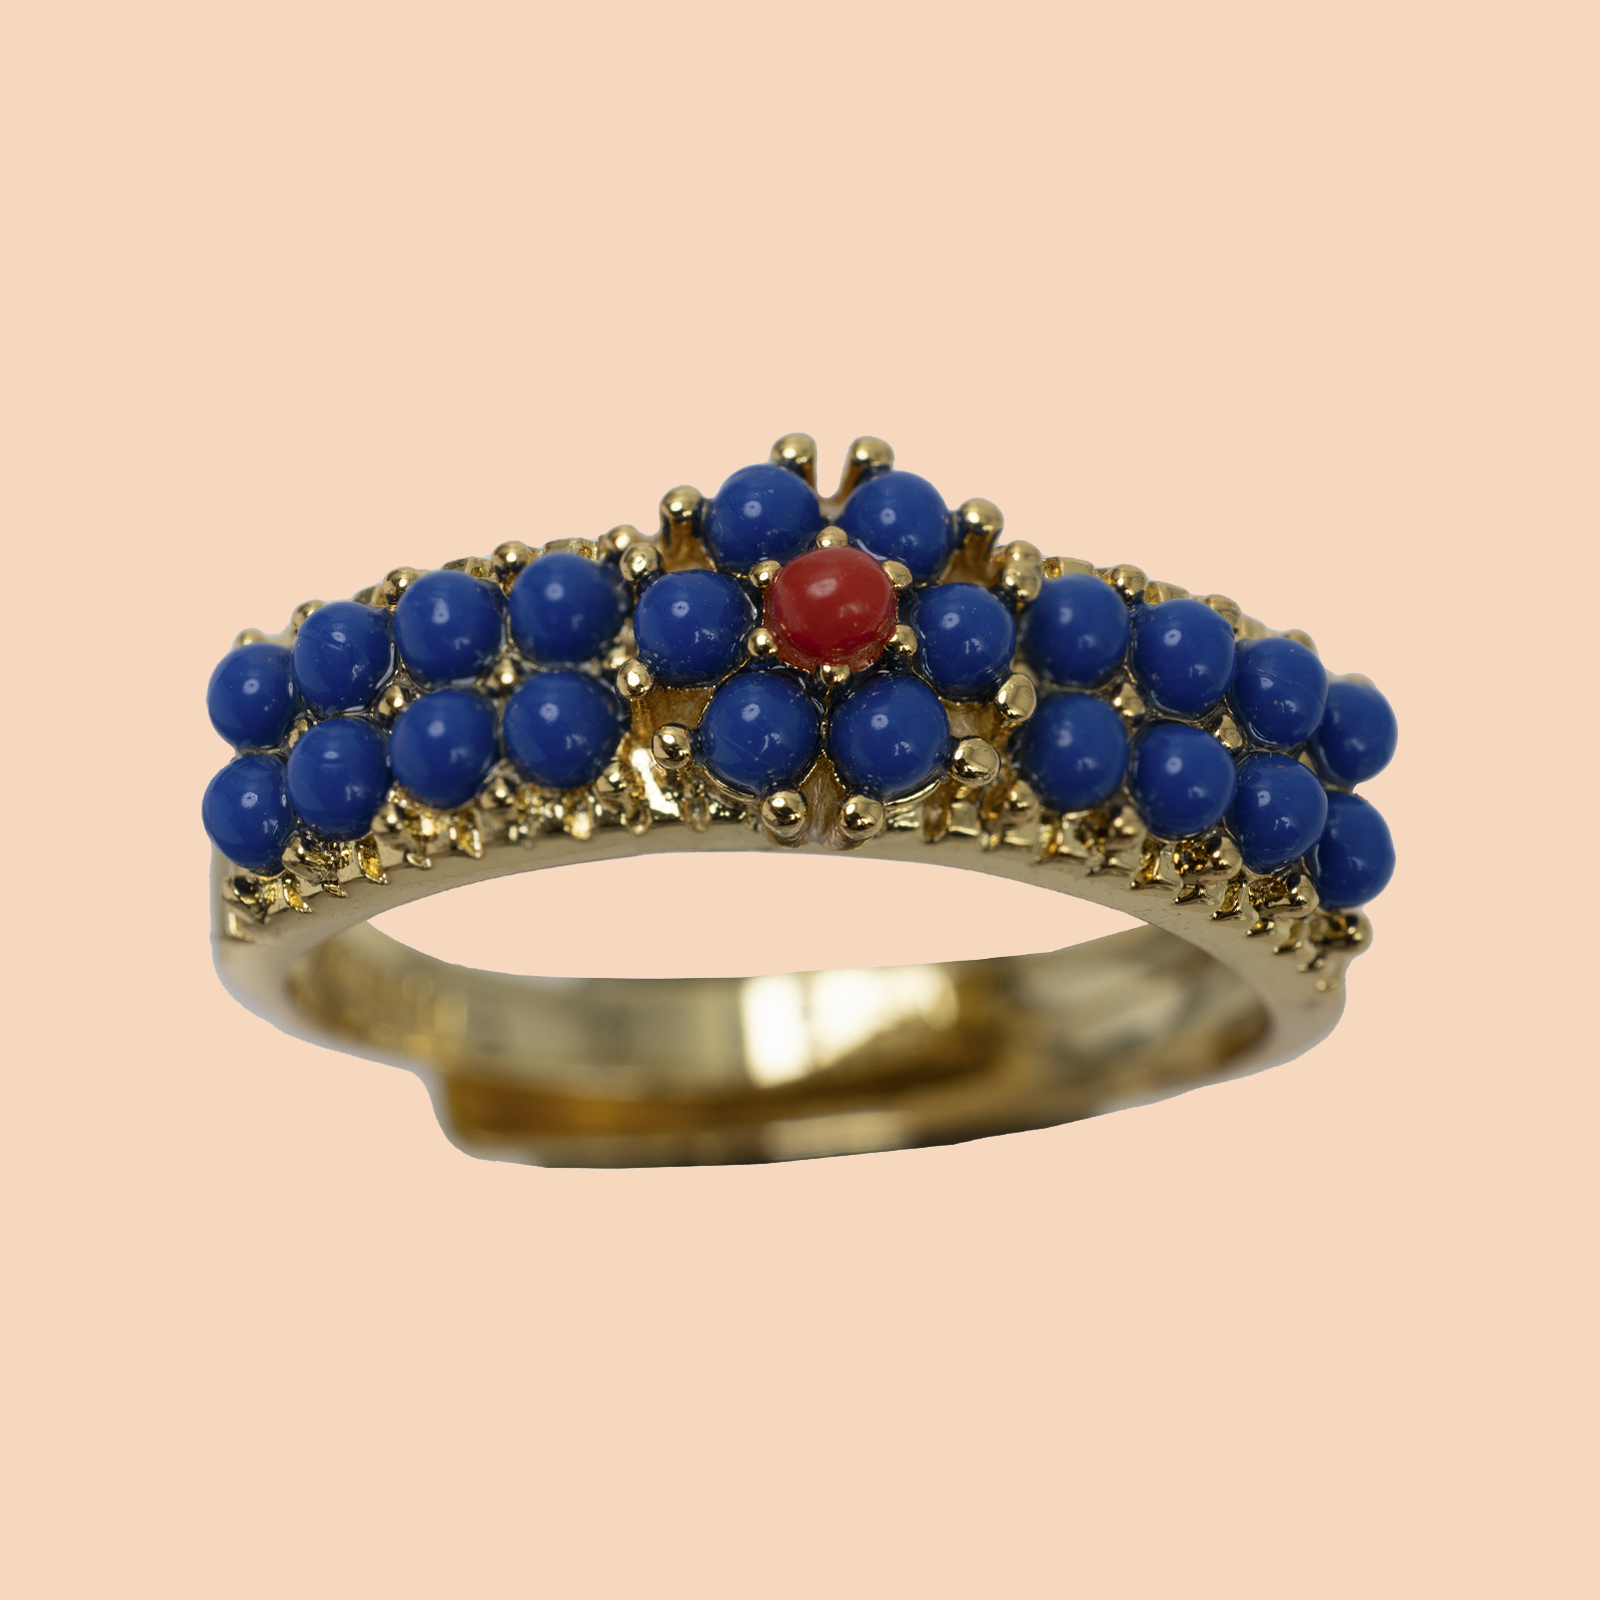 The Amazon Ring Blue